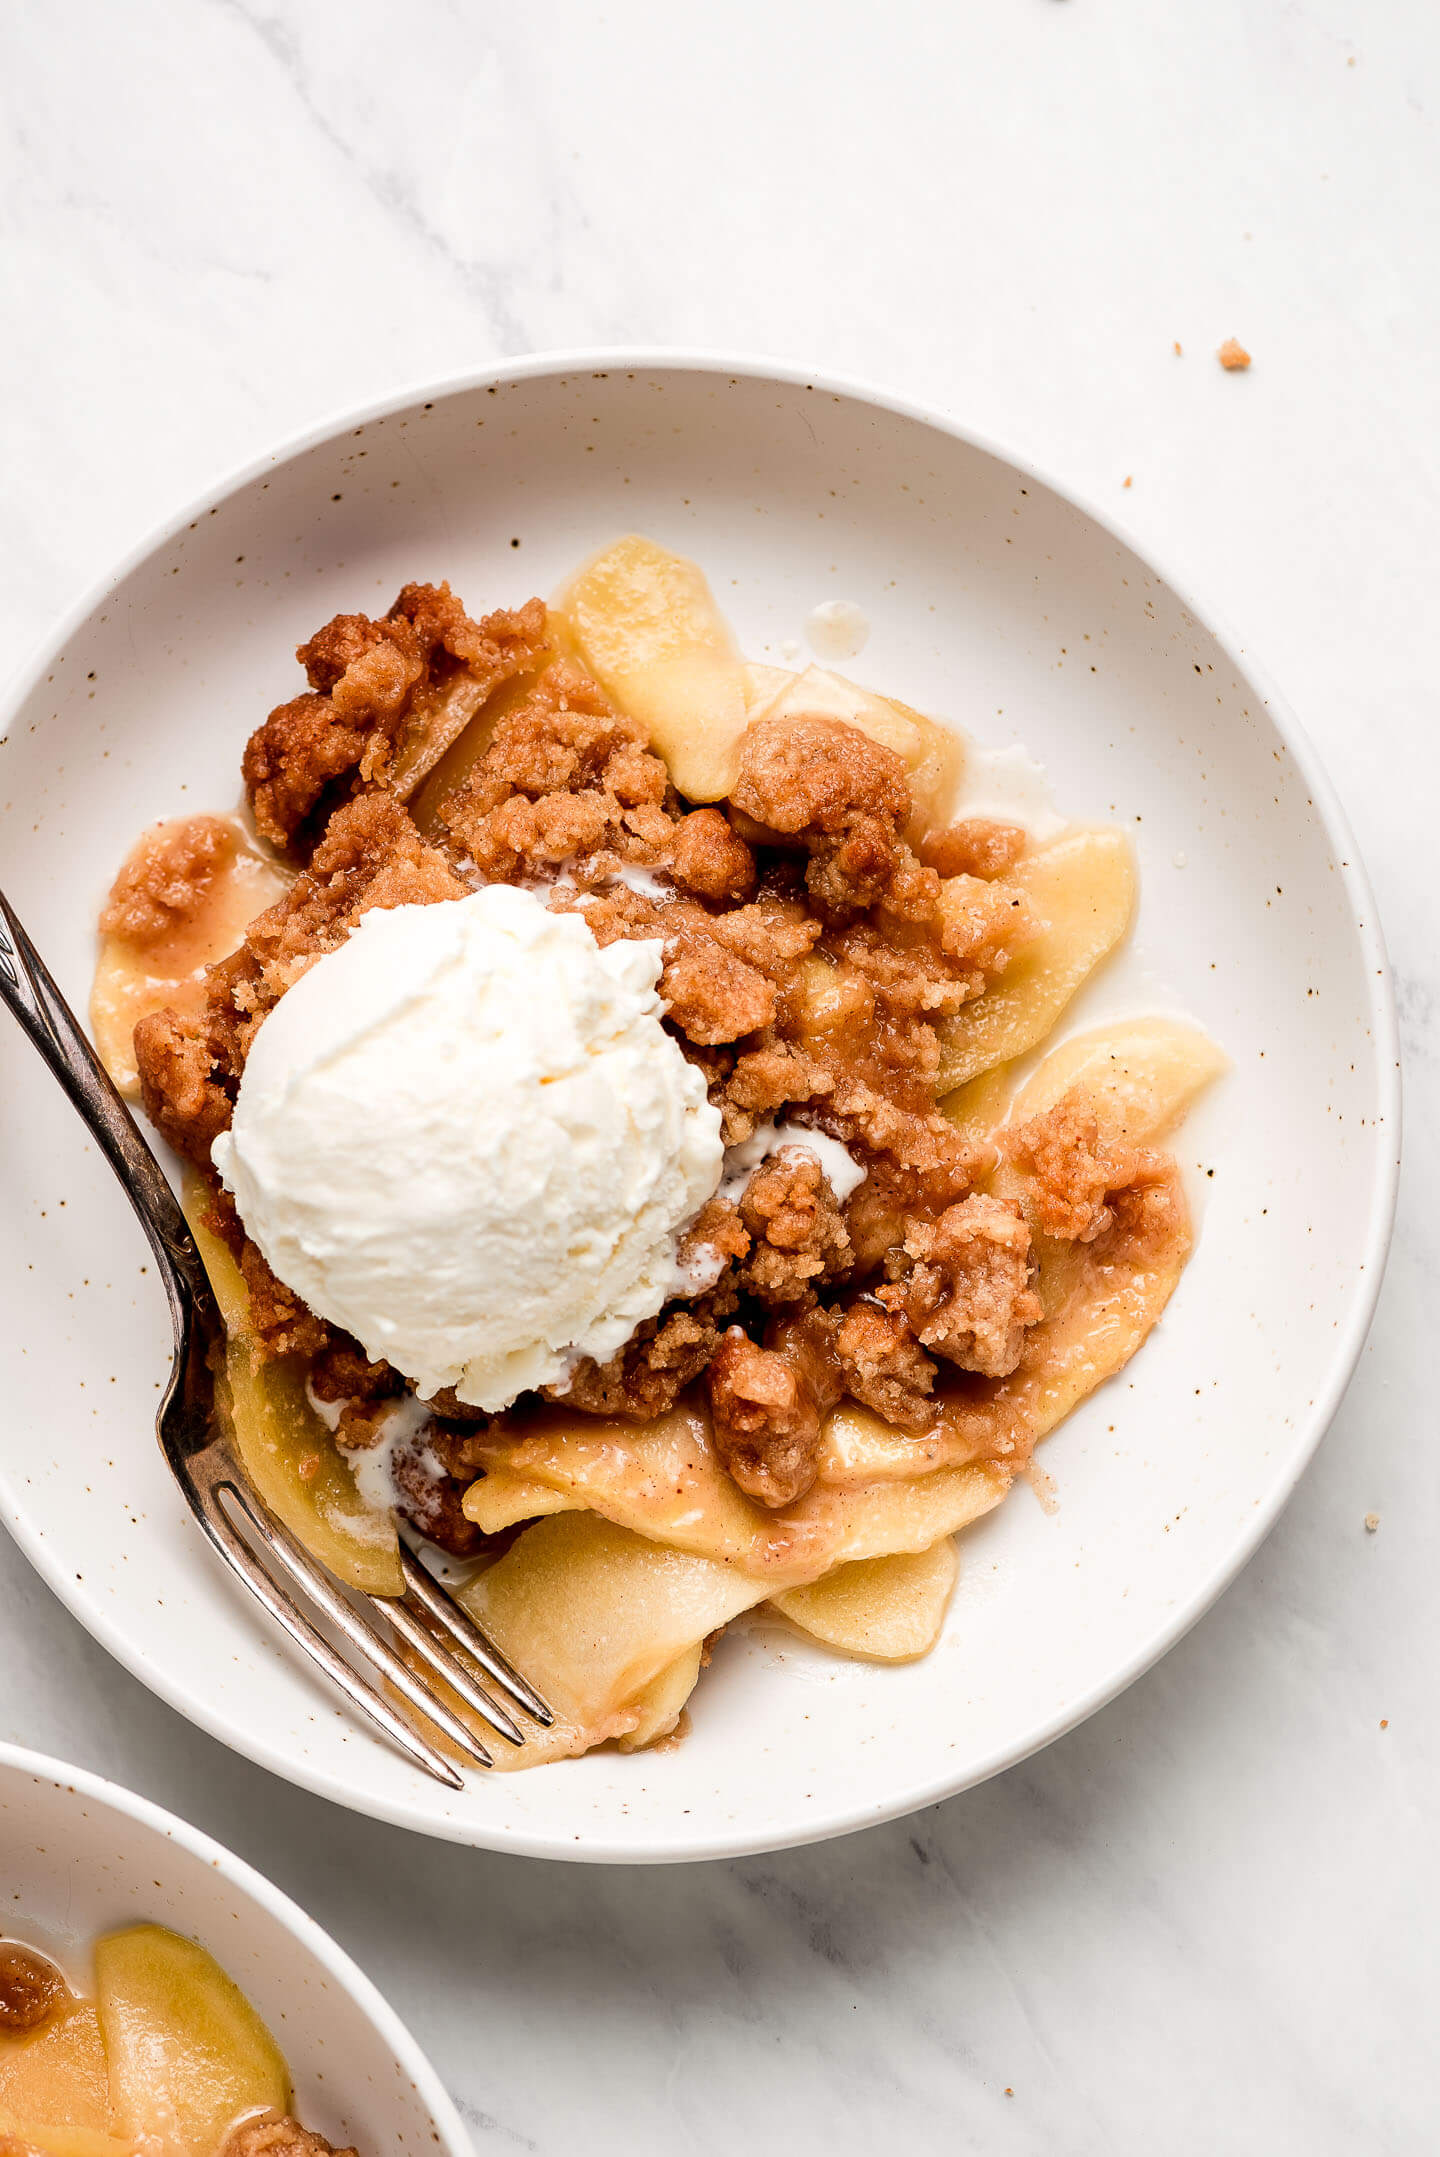 Top view of Apple Crisp in a bowl with a fork in the side.